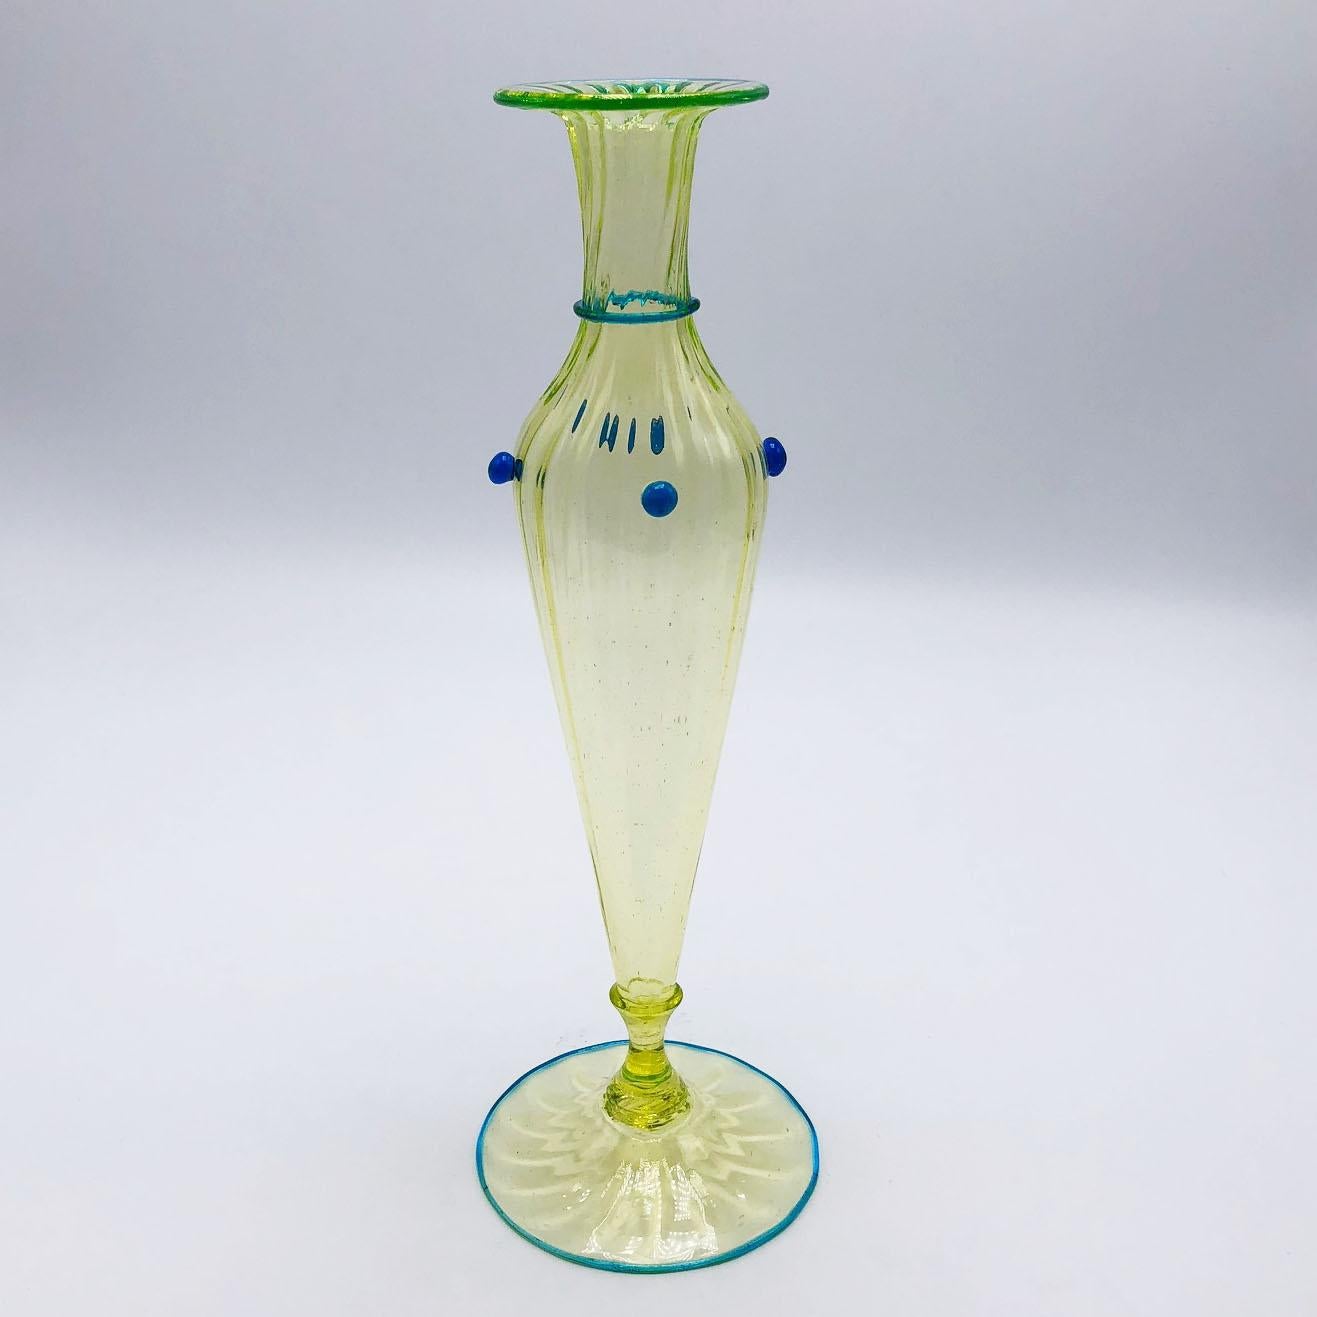 French Ribbed Murano Glass Vase with Bud Detailing by Salviati, circa 1910